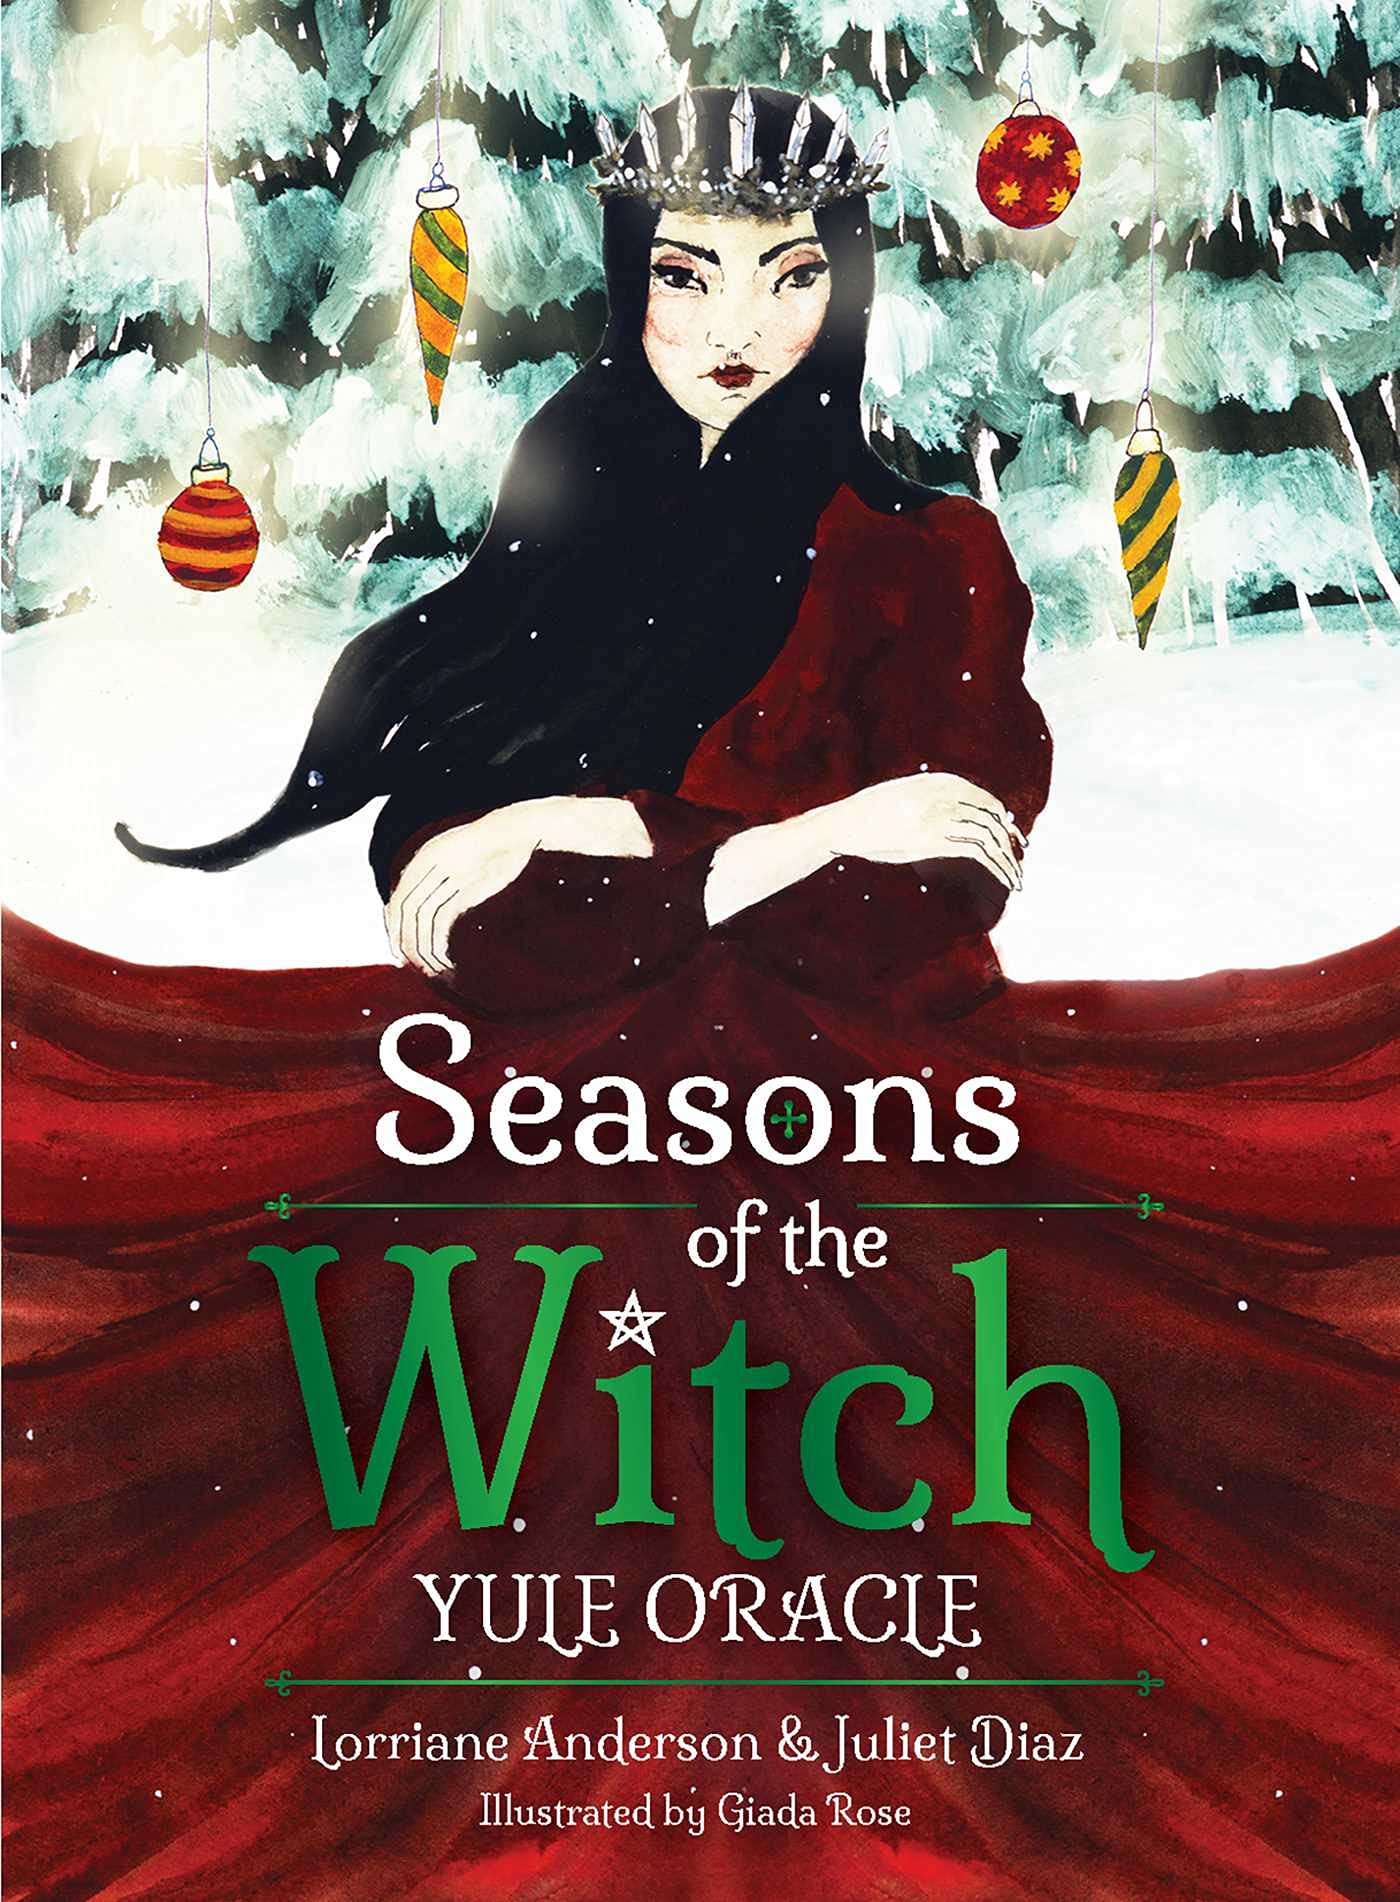 Seasons of the Witch: Yule Oracle (cards)